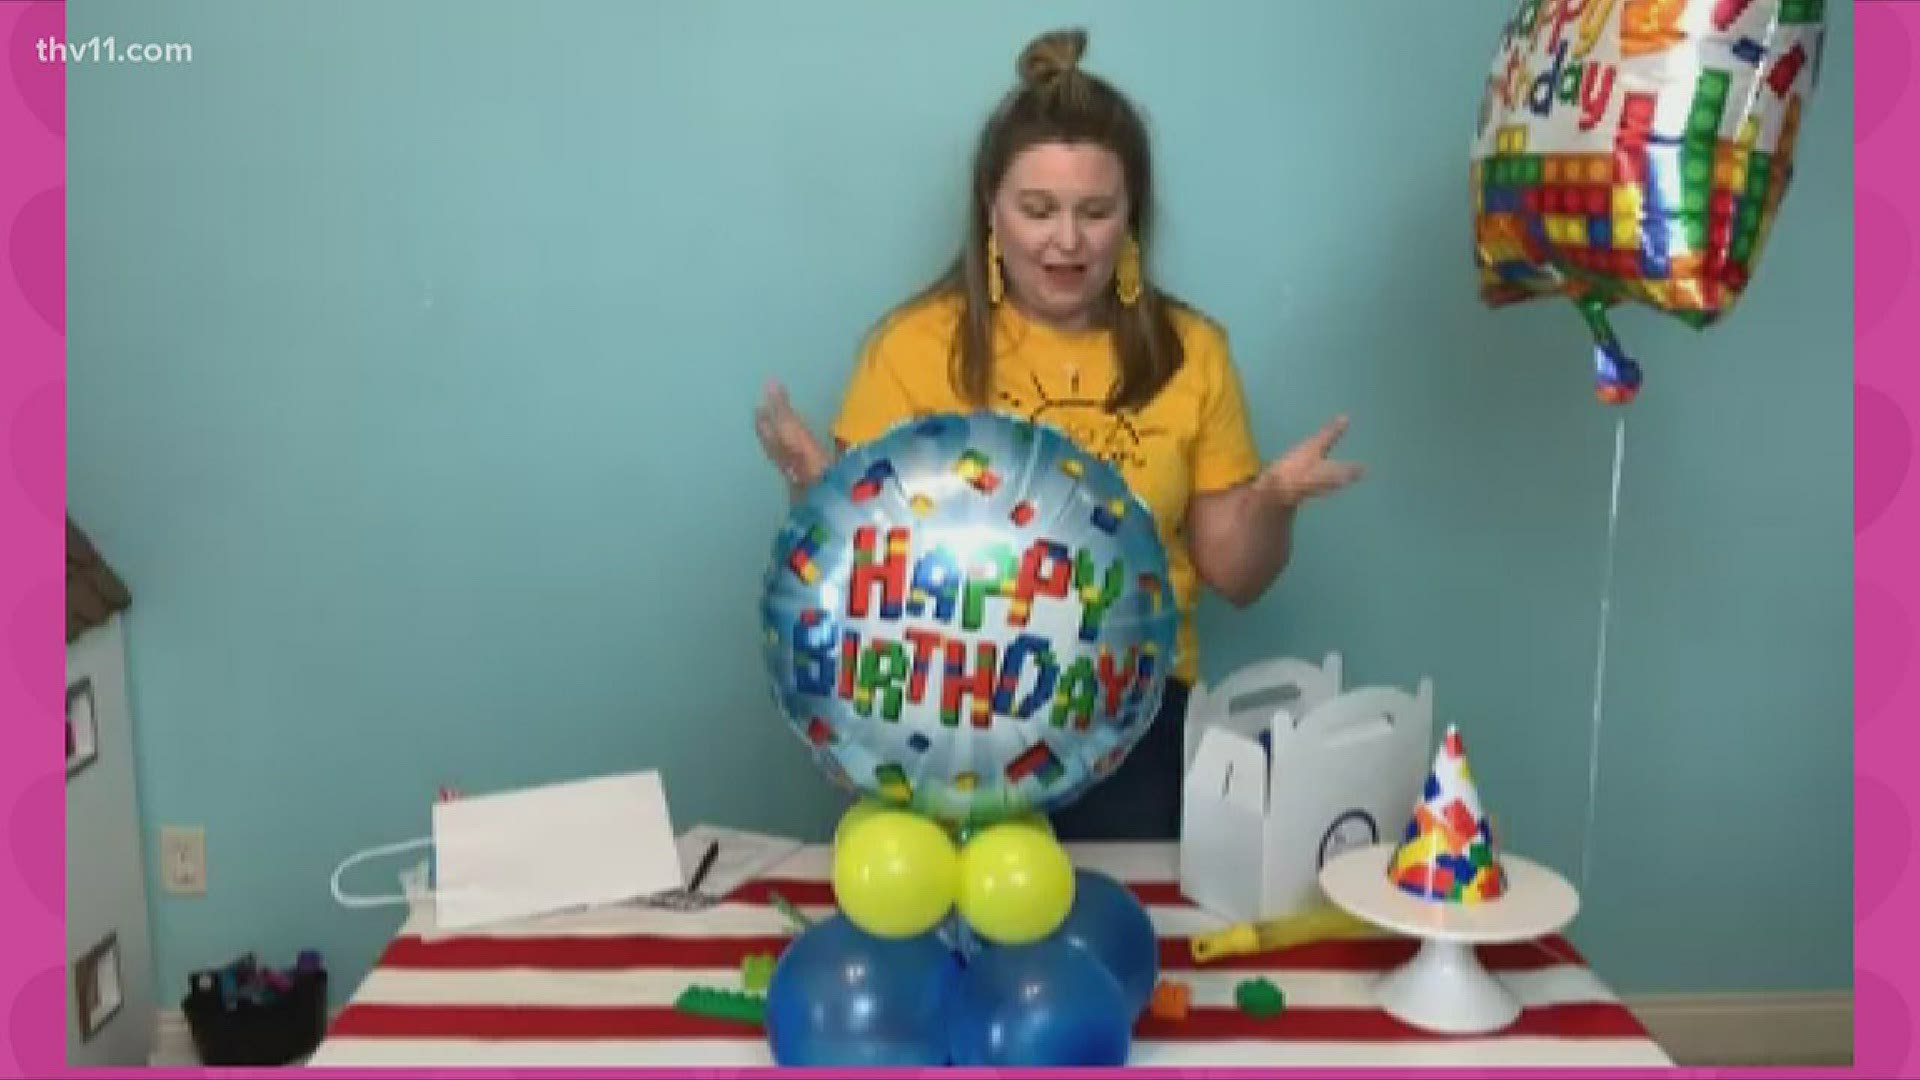 Krista Ryken with K to Z Design shares how she planned a great birthday party for her son while allowing all the guests to stay at home.